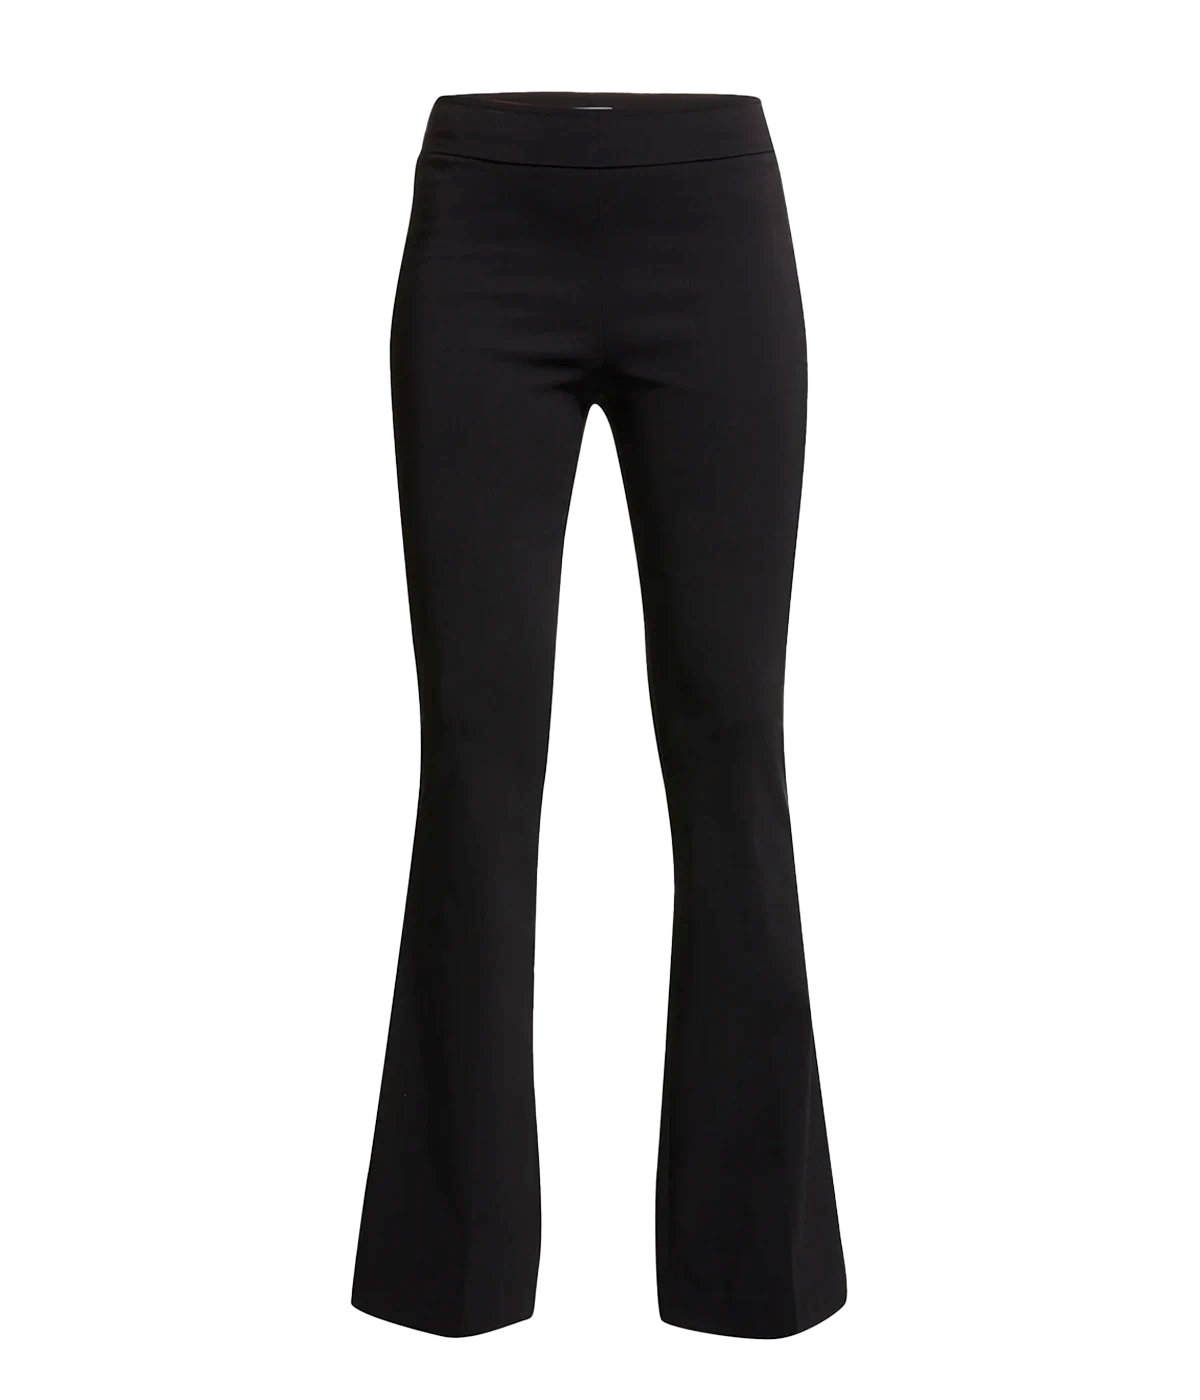 Bellini Pants in Smooth Stretch Black